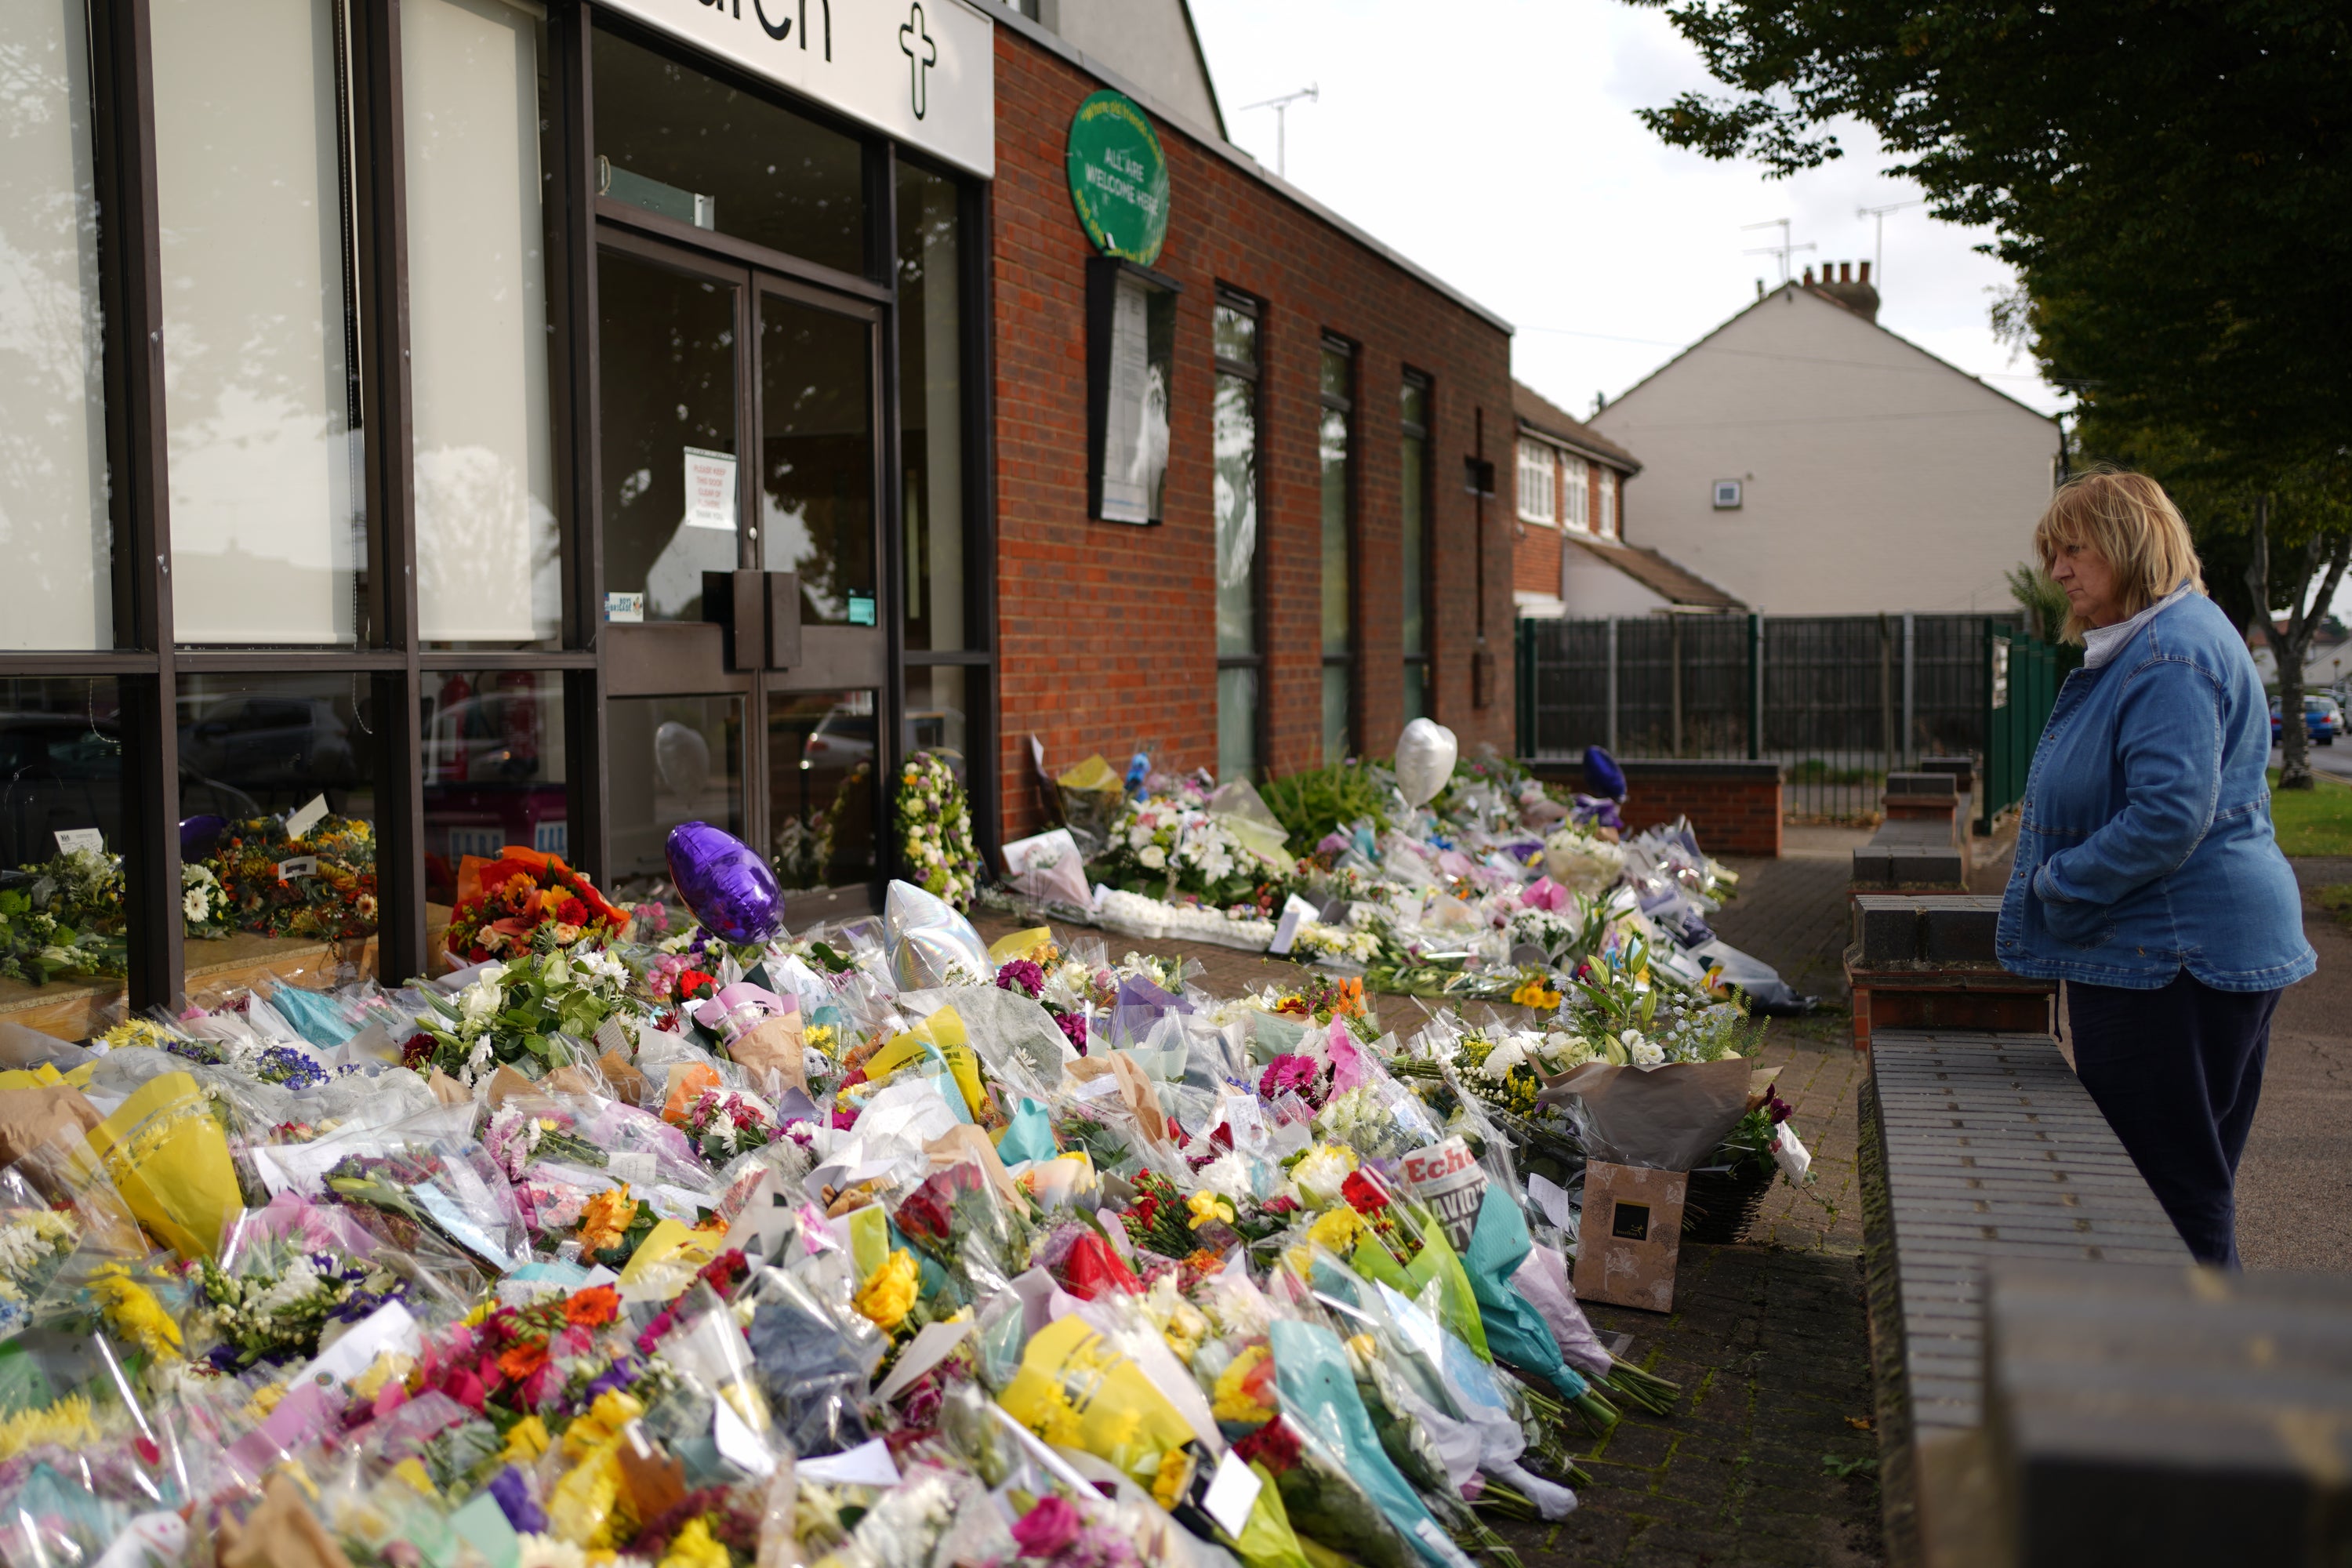 Floral tributes left outside the Belfairs Methodist Church in Leigh-on-Sea (Joe Giddens/PA)